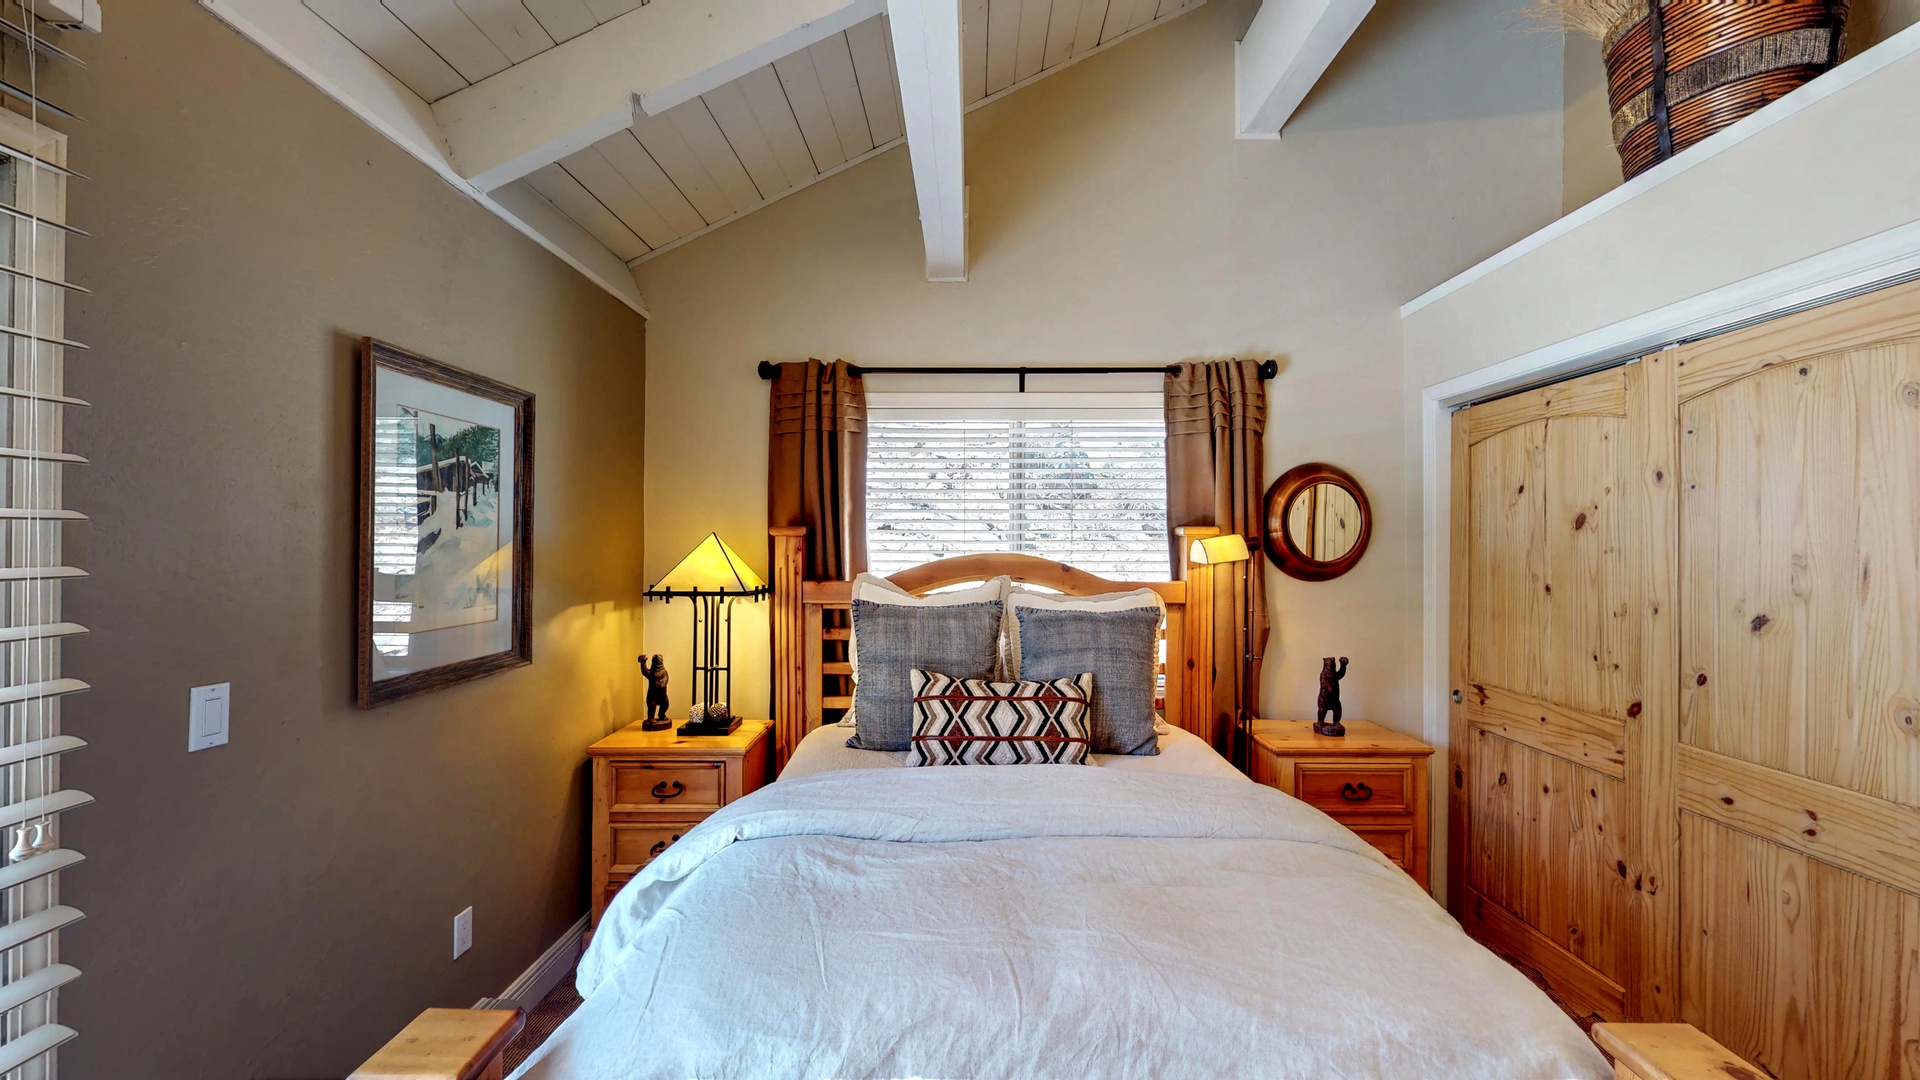 Bedroom with nearby closet and two nightstands: Eagle's Nest Lodge